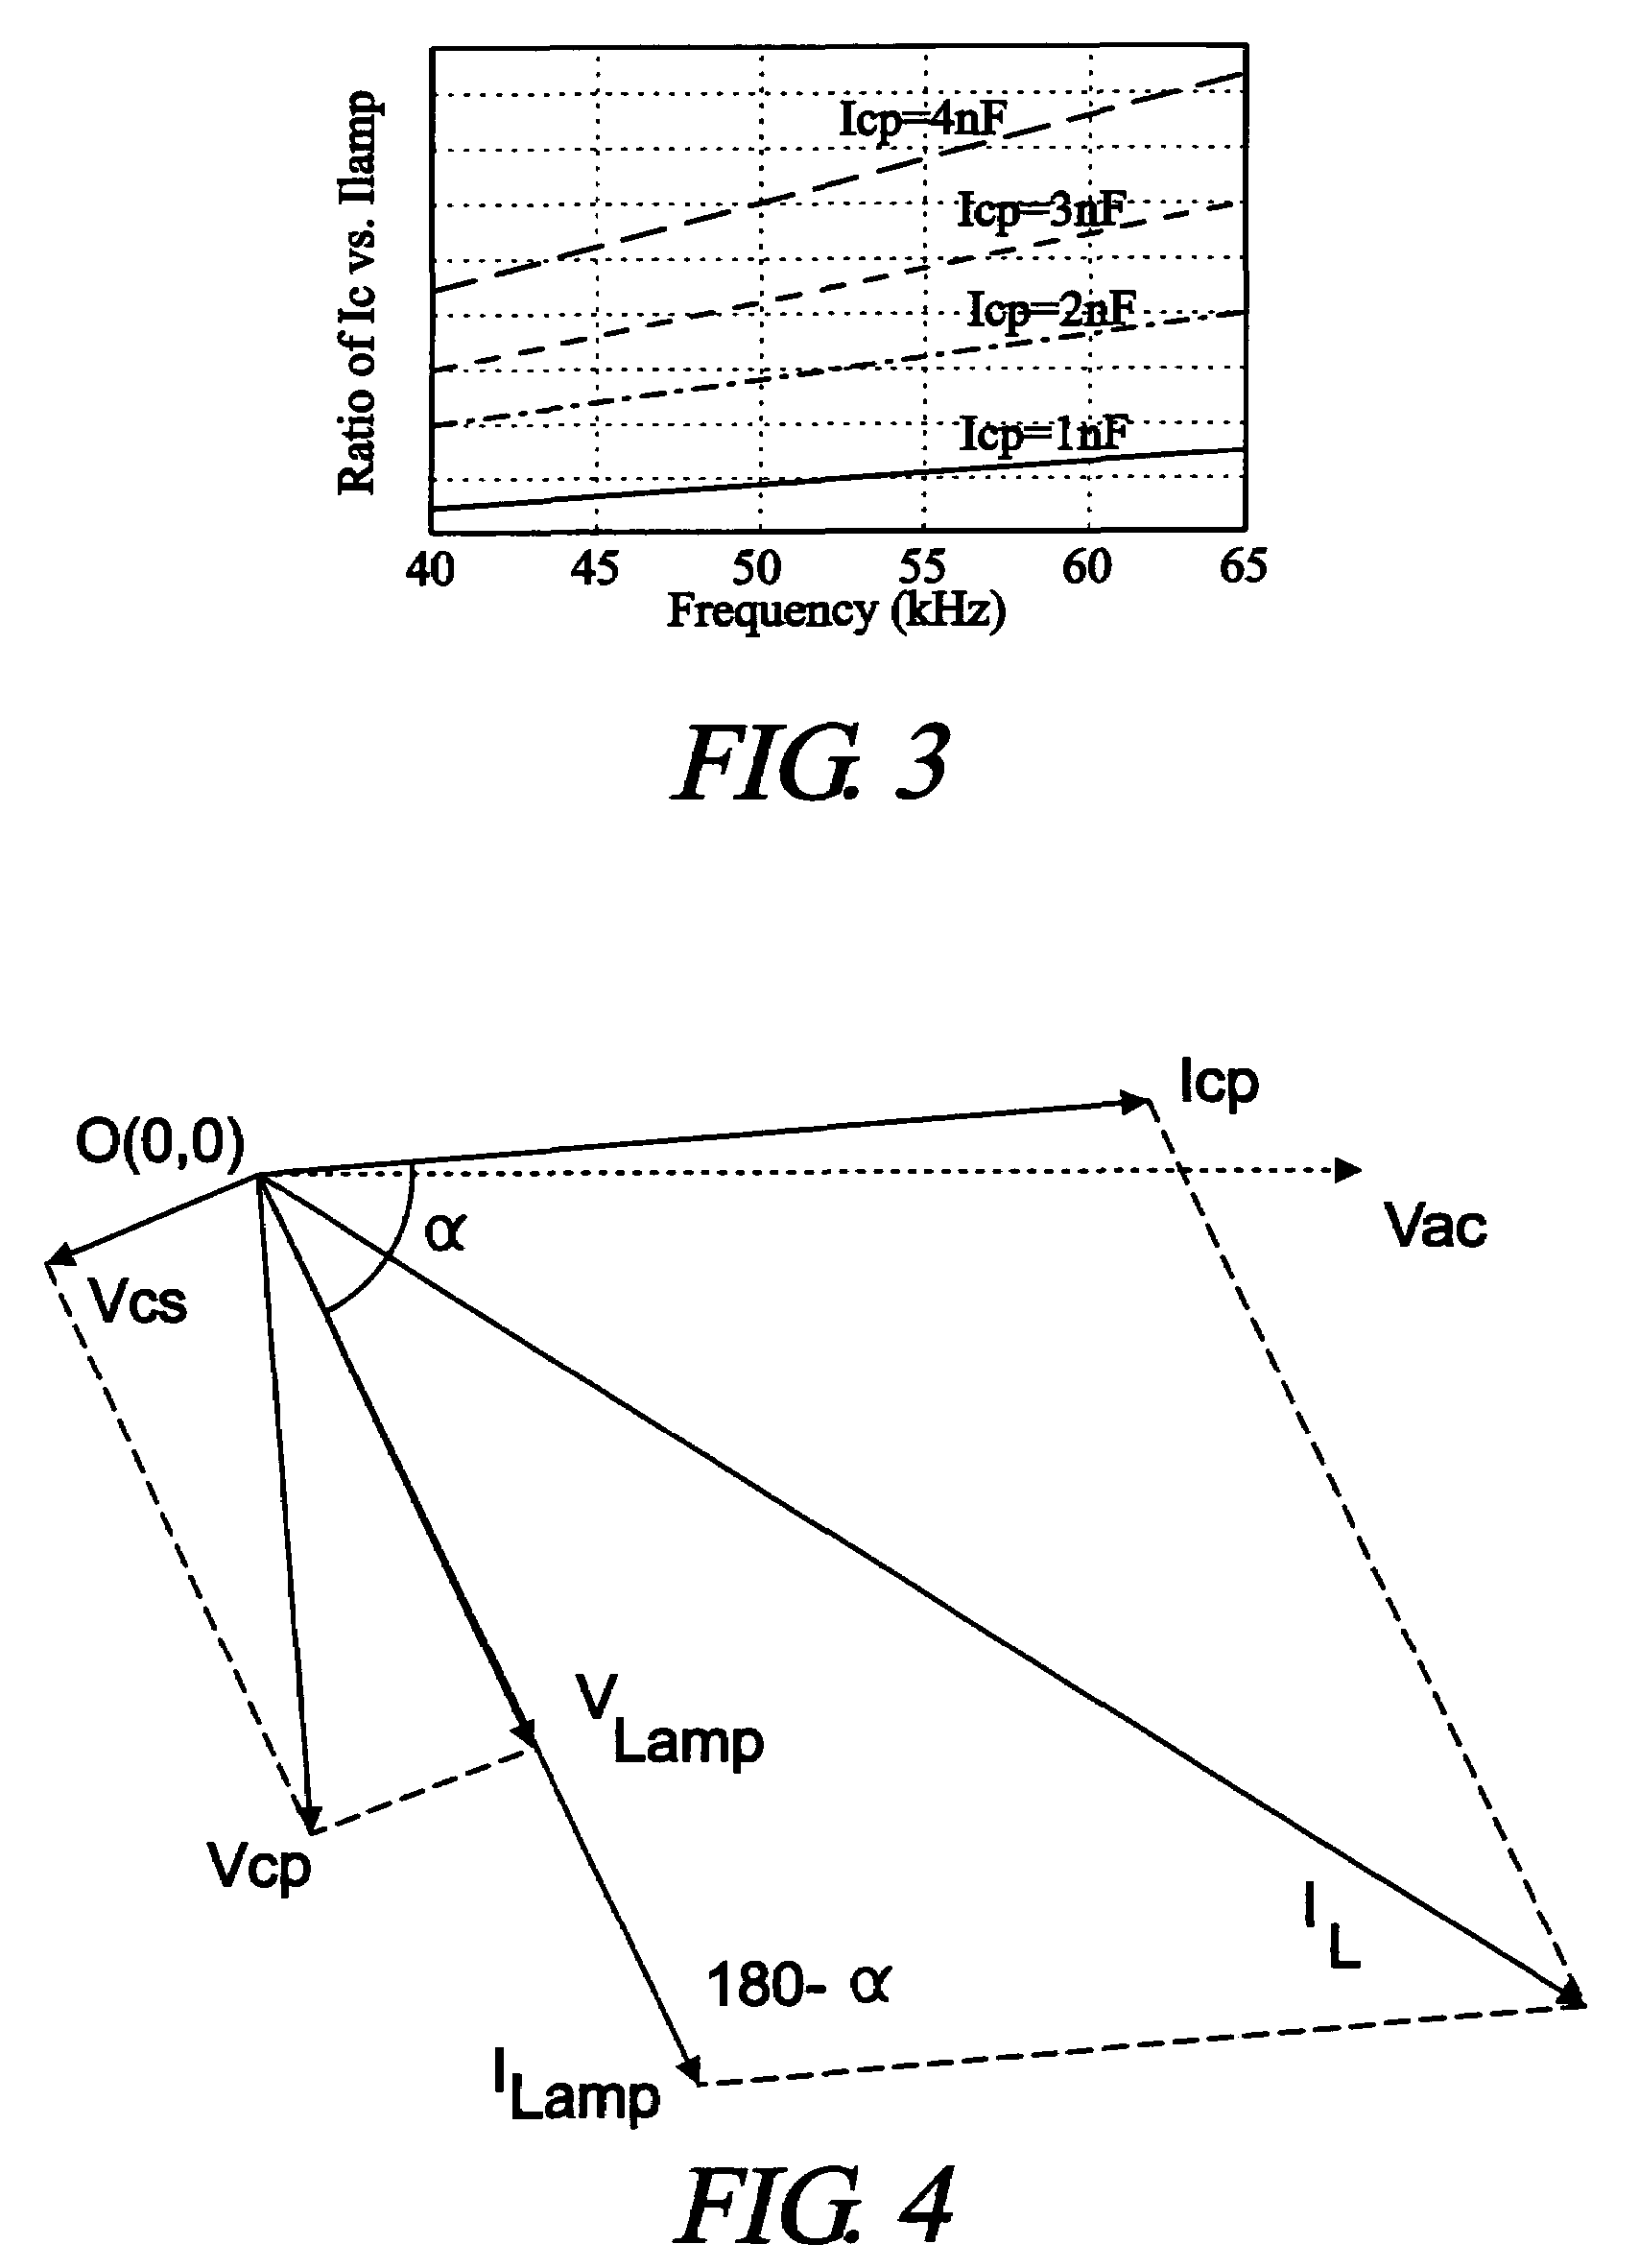 Electronic ballast with adaptive lamp preheat and ignition